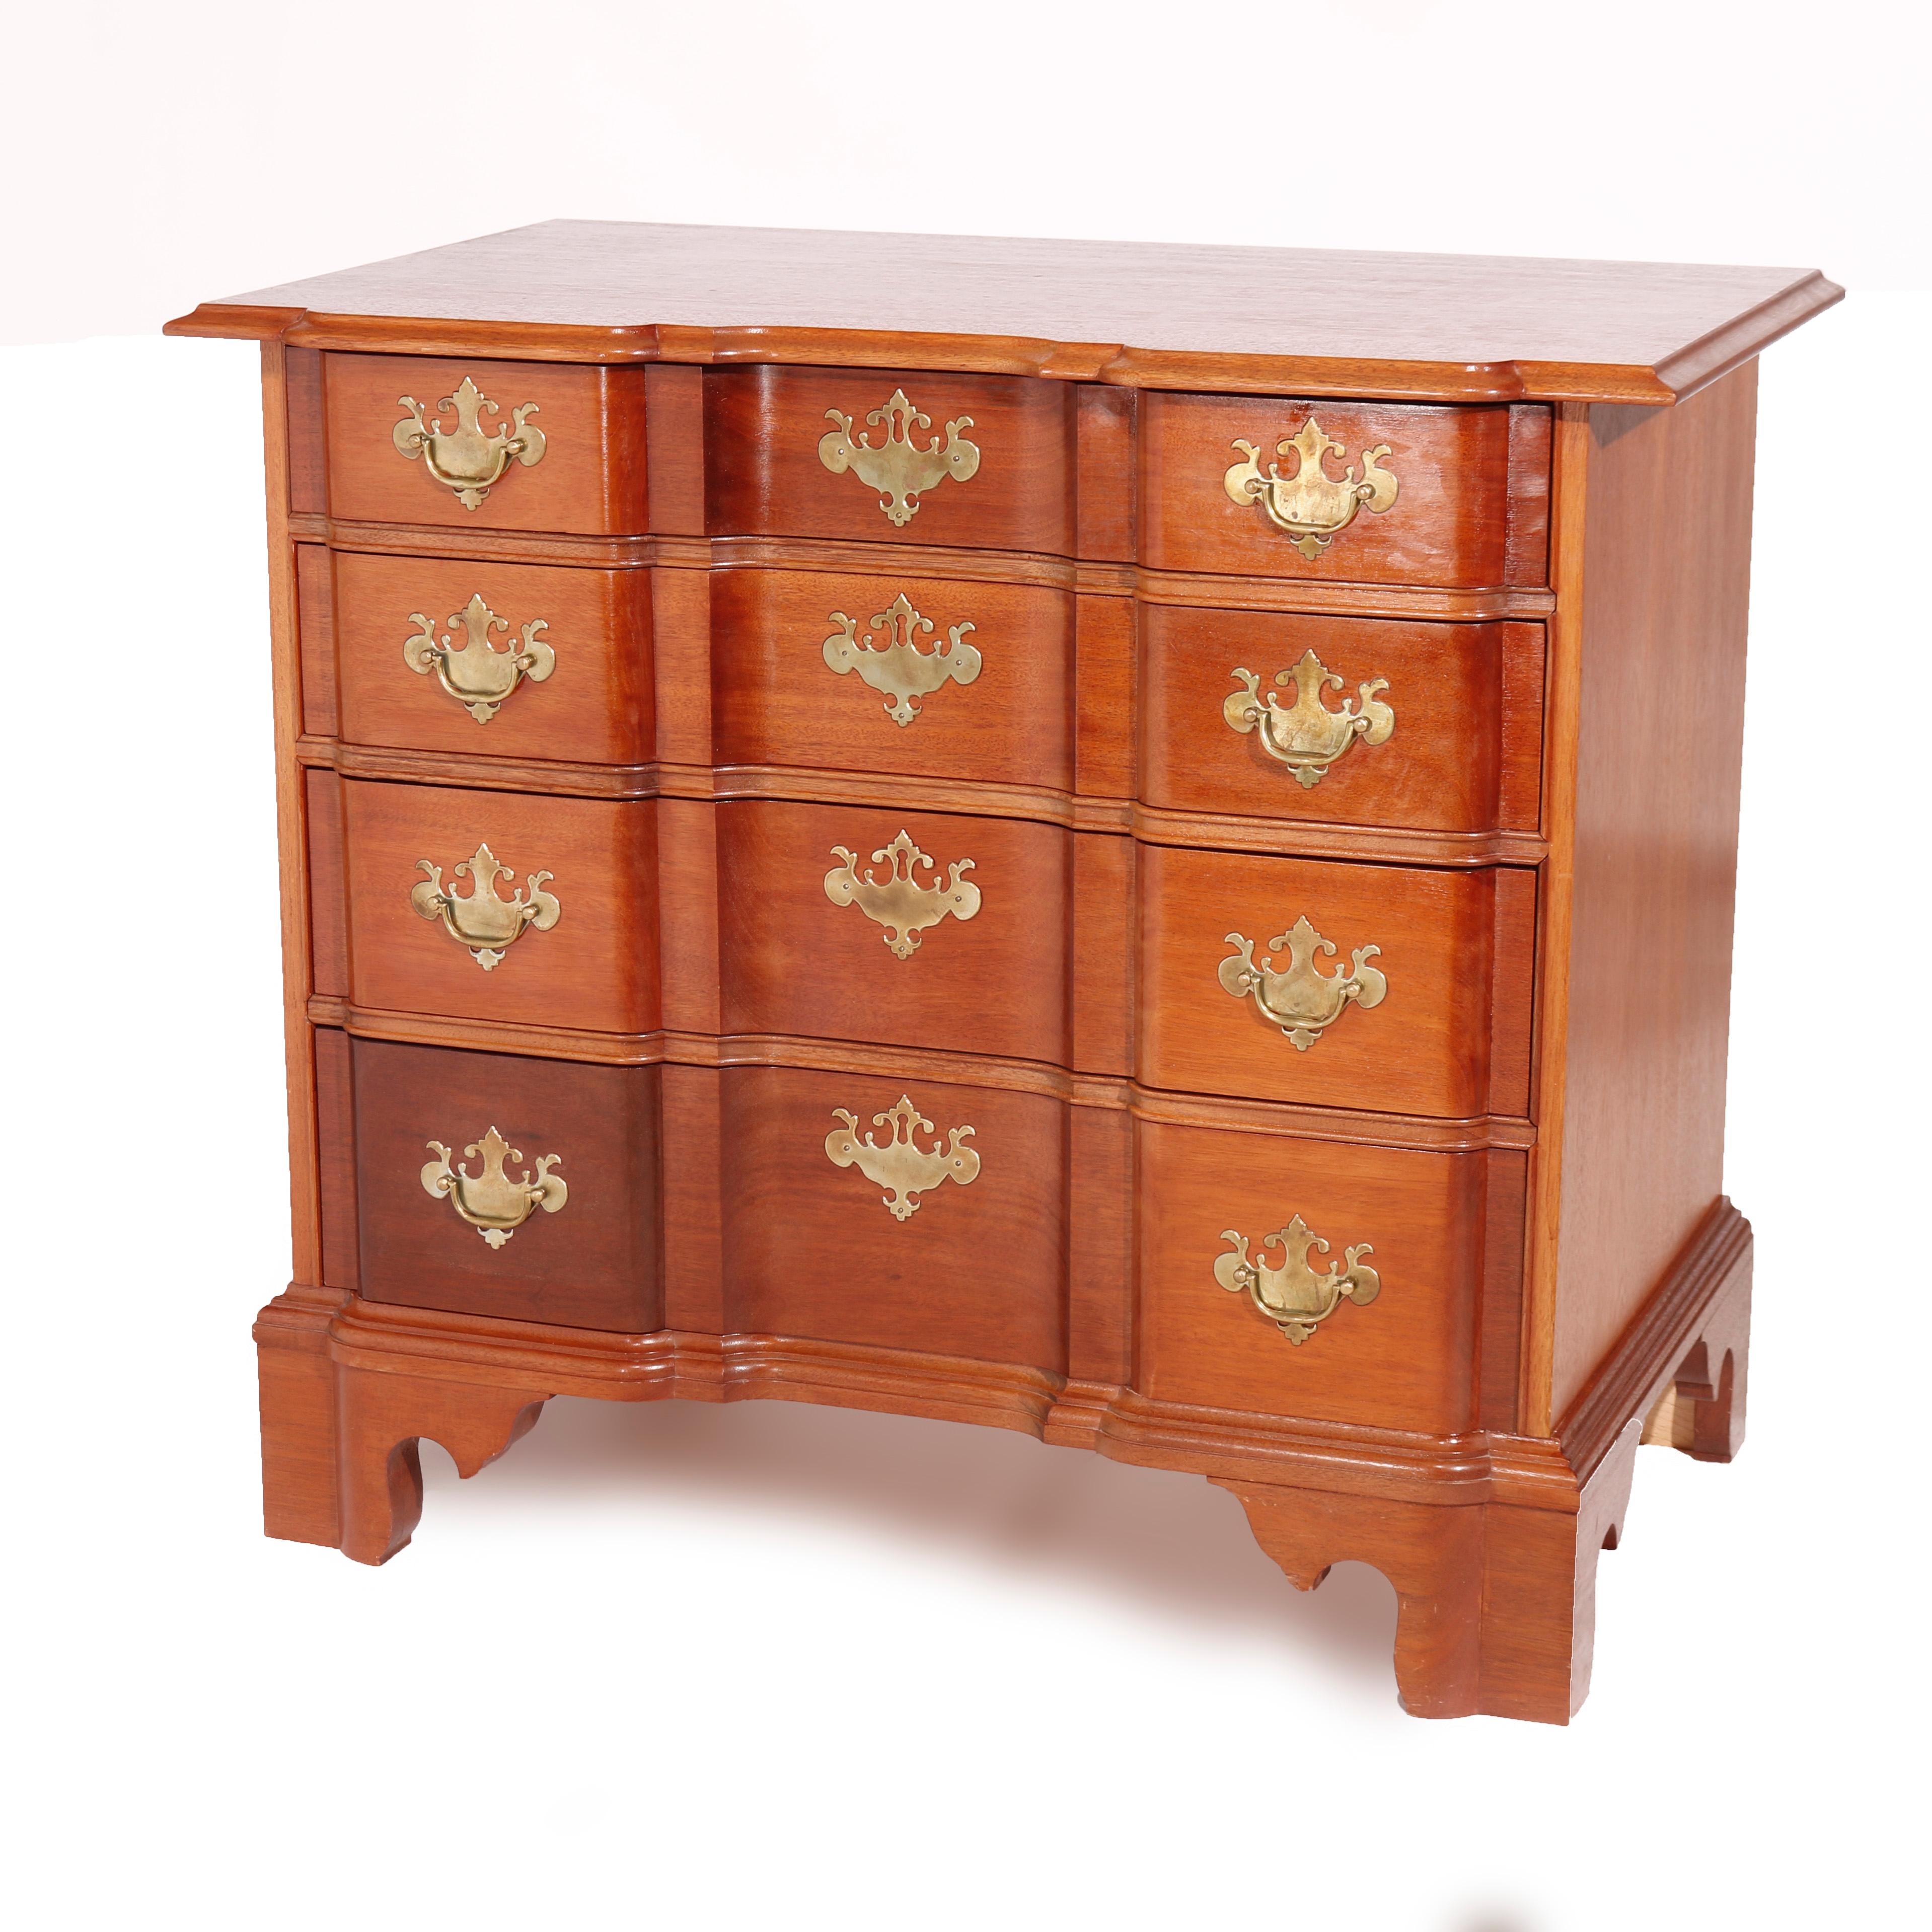 An English Chippendale style chest of drawers attributed to the Williamsburg Bartley Collection offers shaped top over graduated long drawers and raised on bracket feet, maker mark as photographed, 20th century

Measures - 31